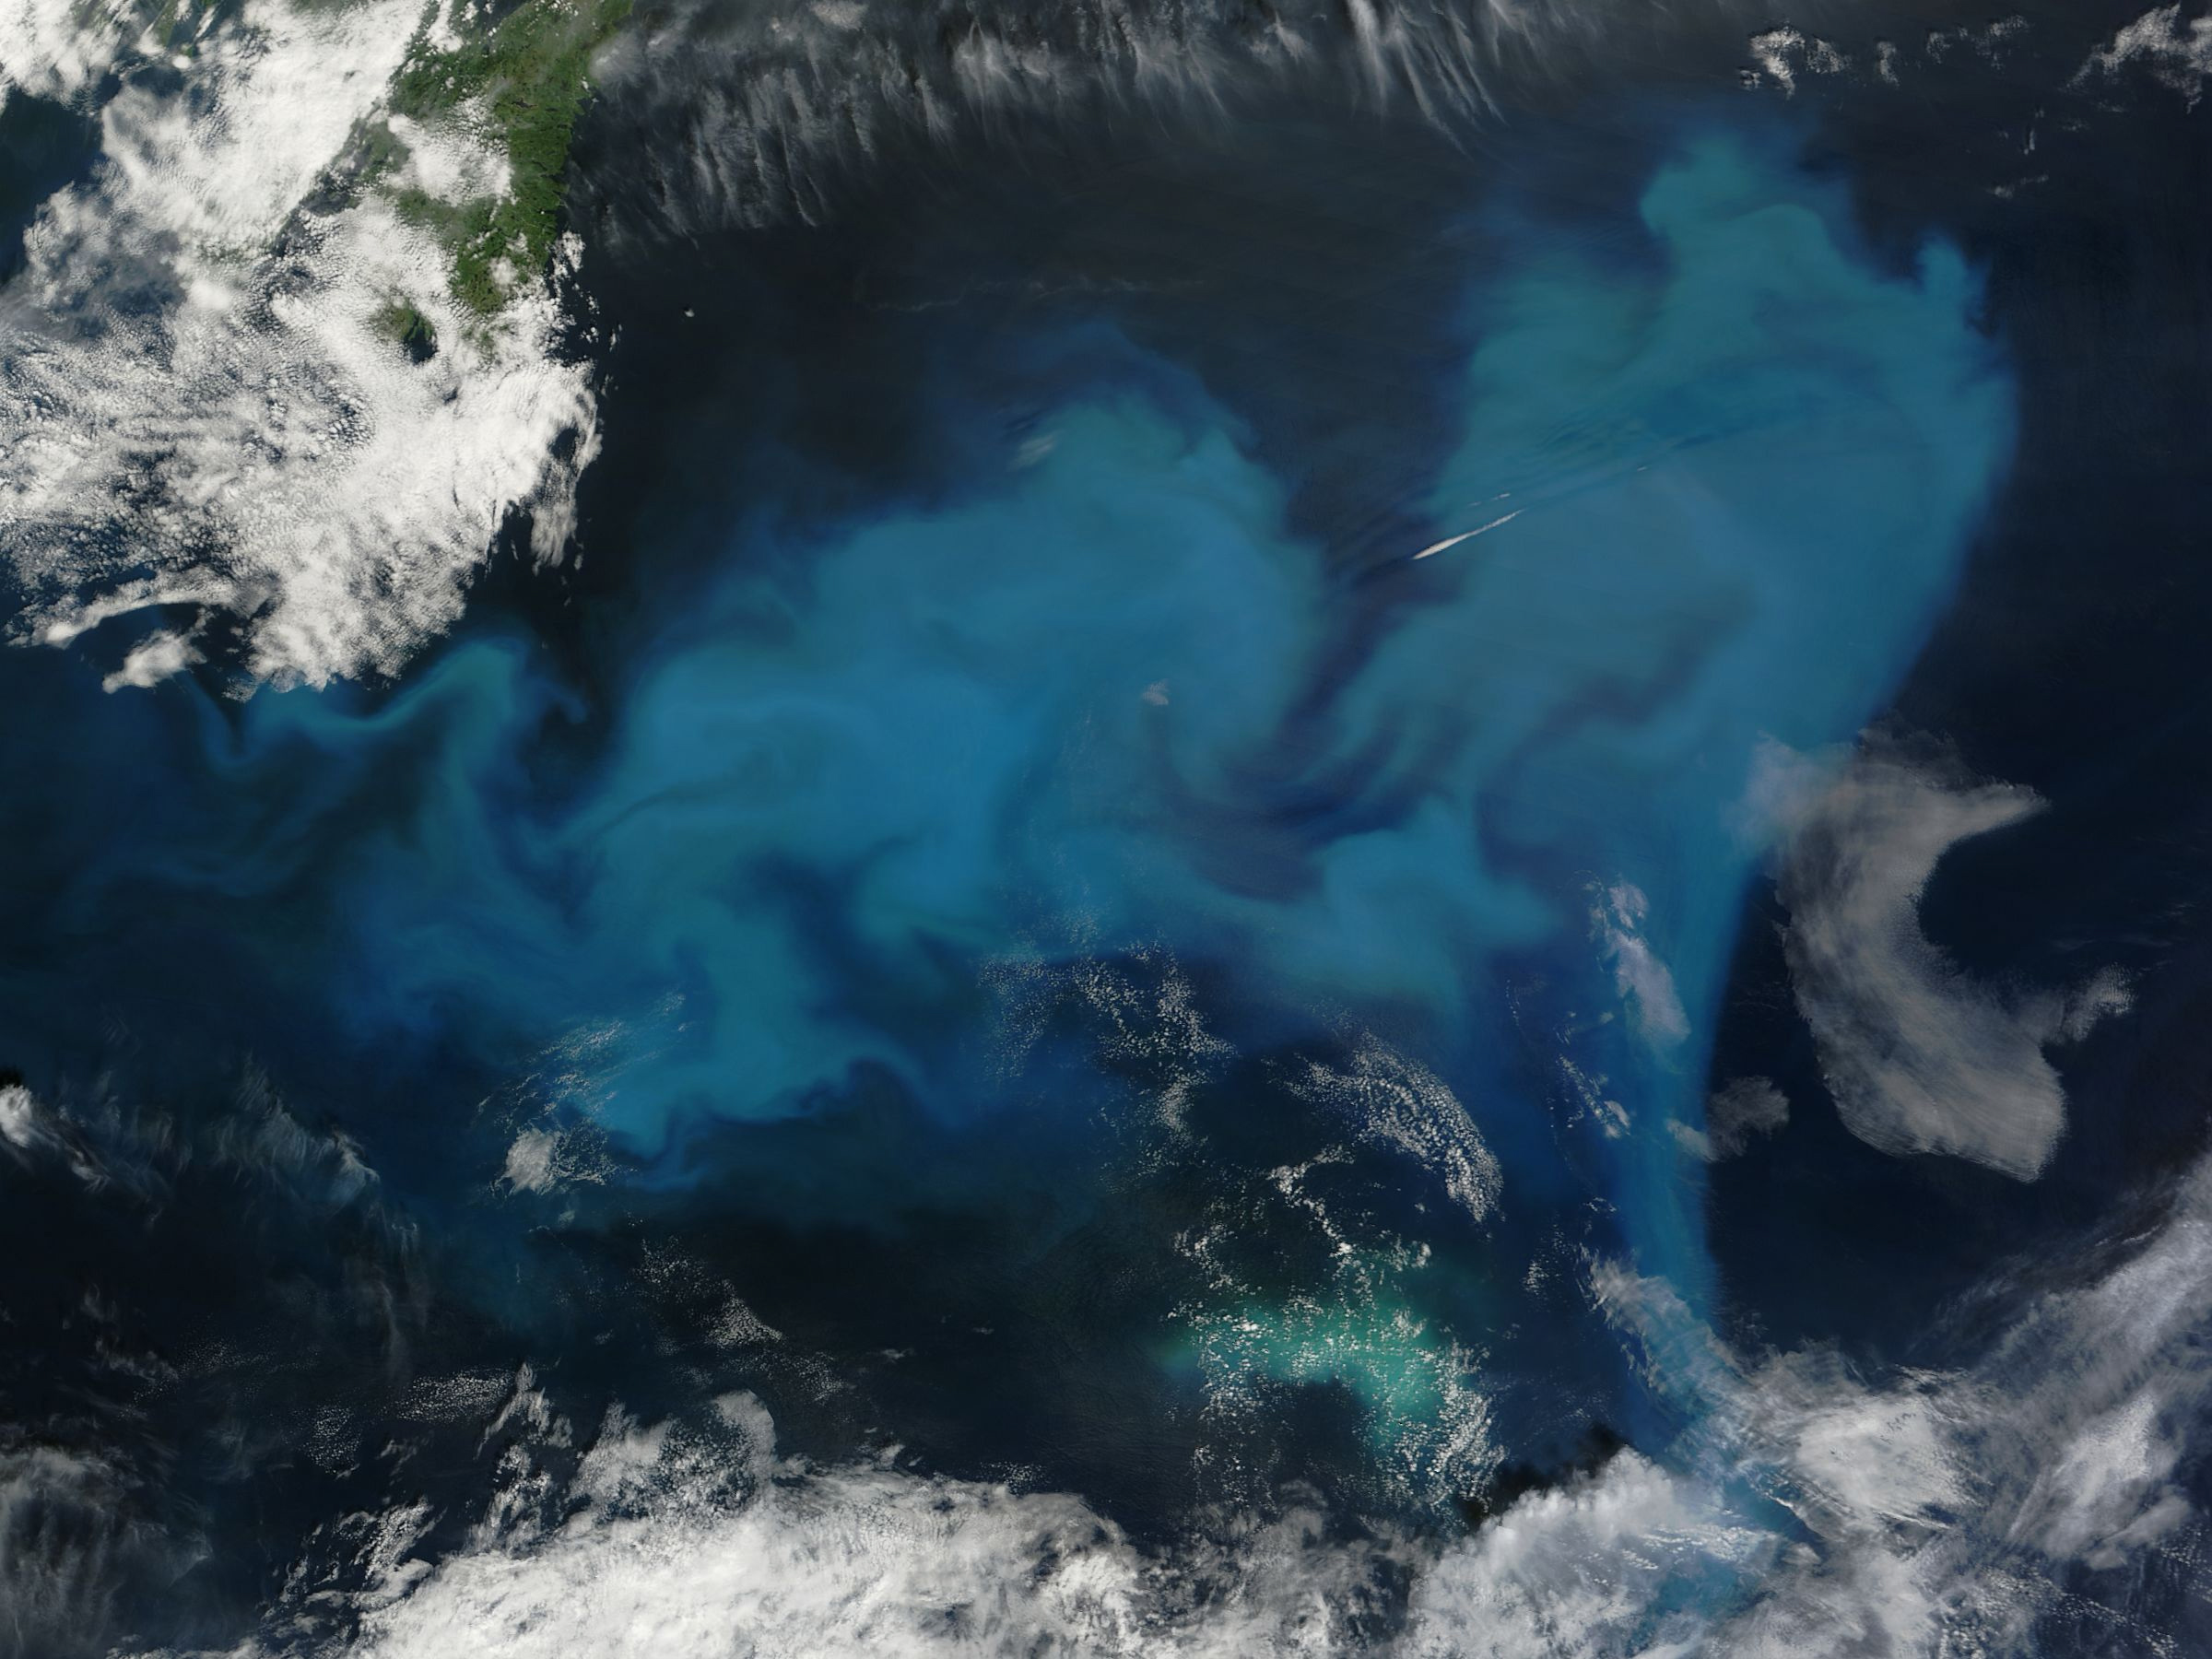 Early Adopters of NASA’s PACE Data to Study Air Quality, Ocean Health